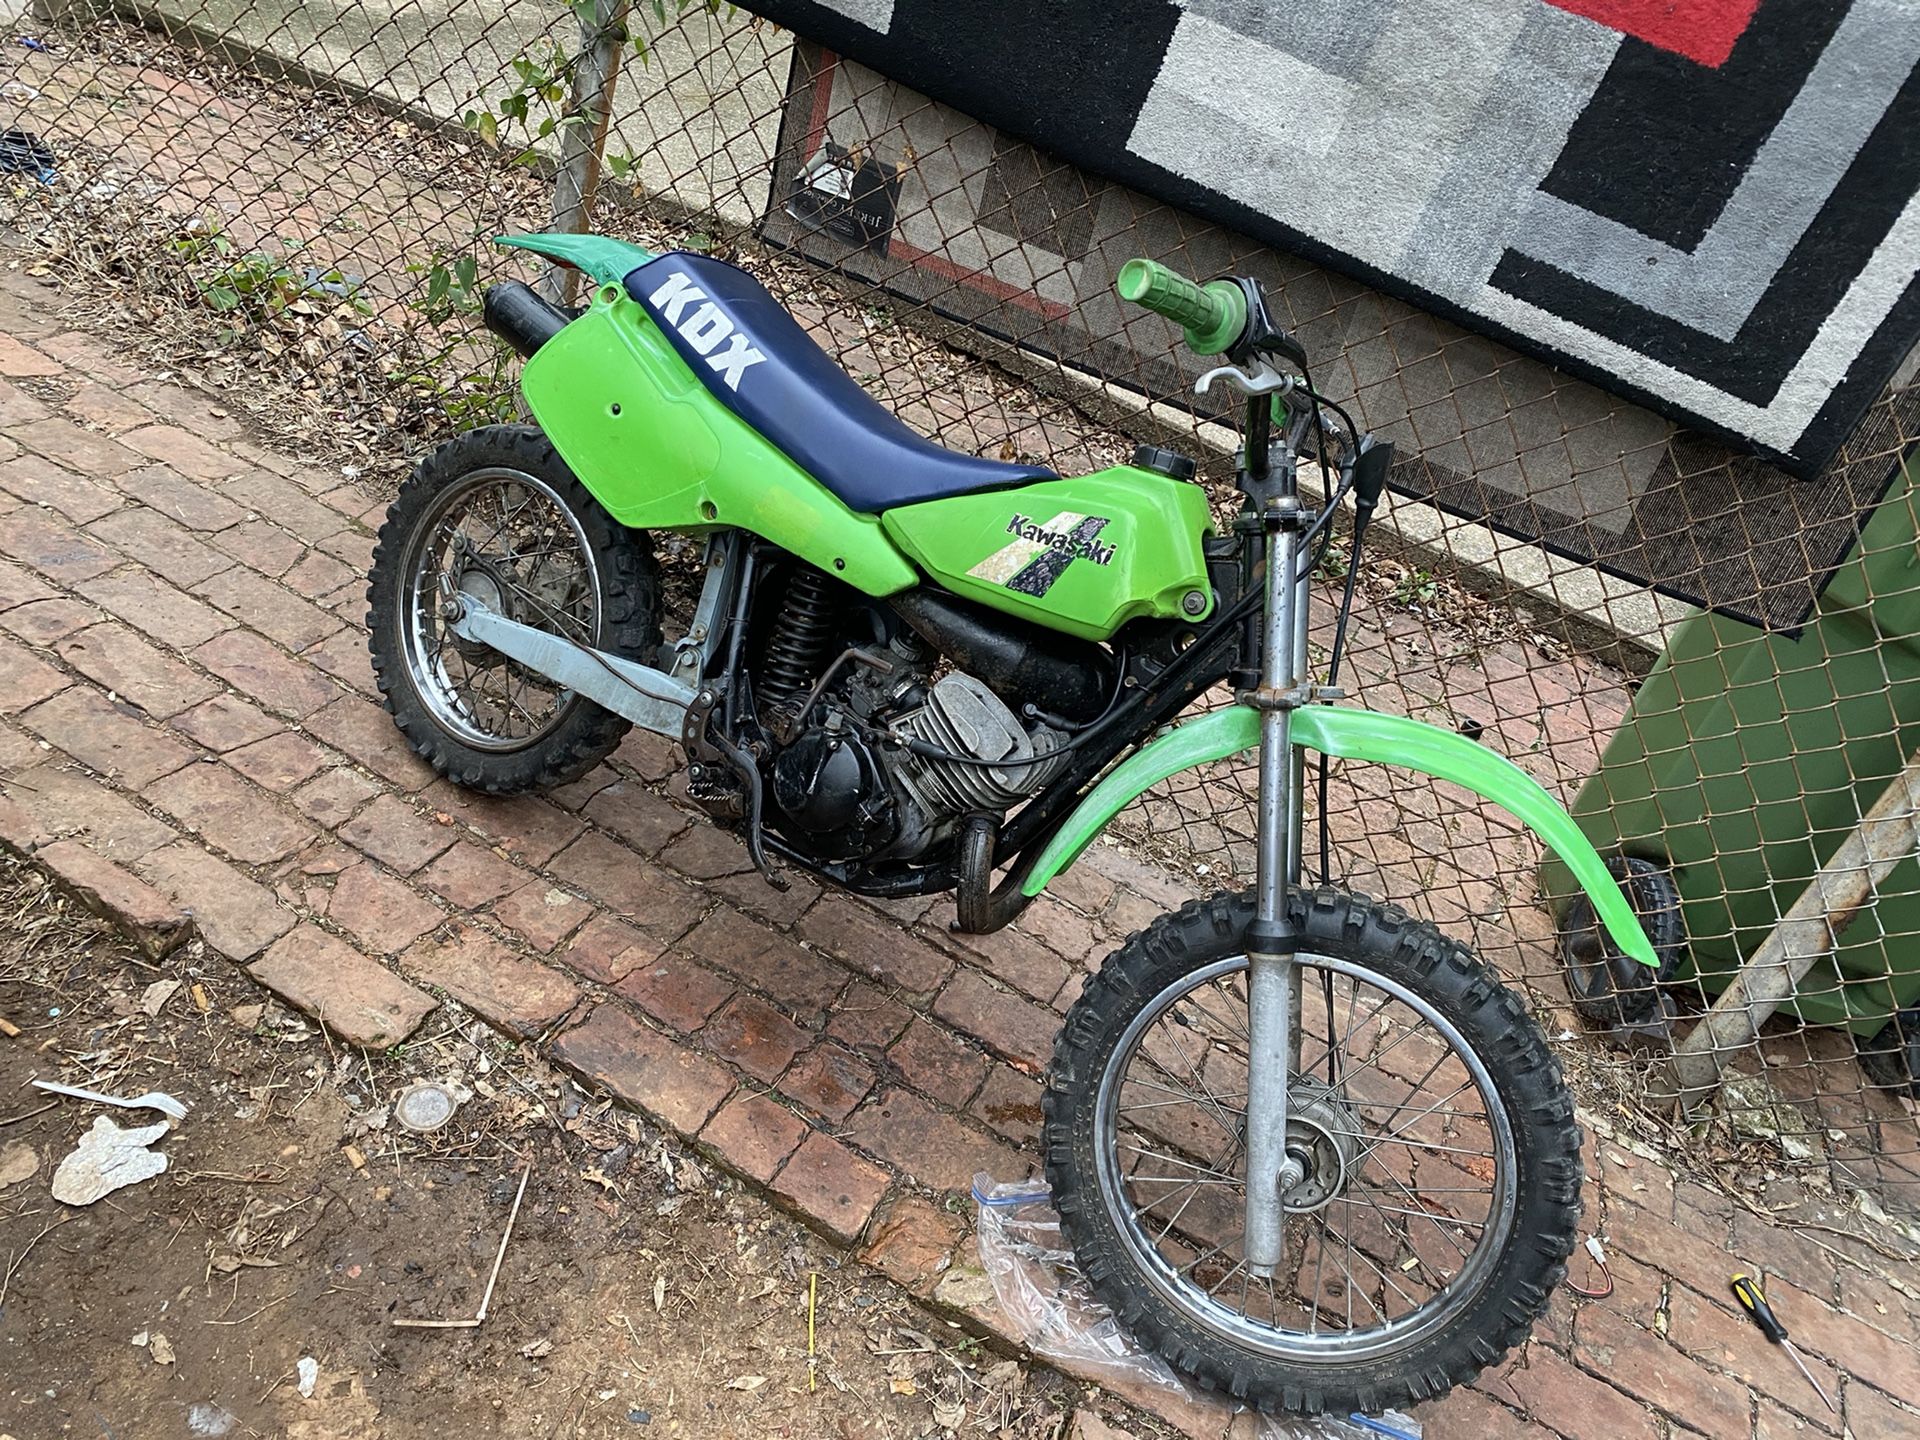 Kdx 80 trade for two atvs